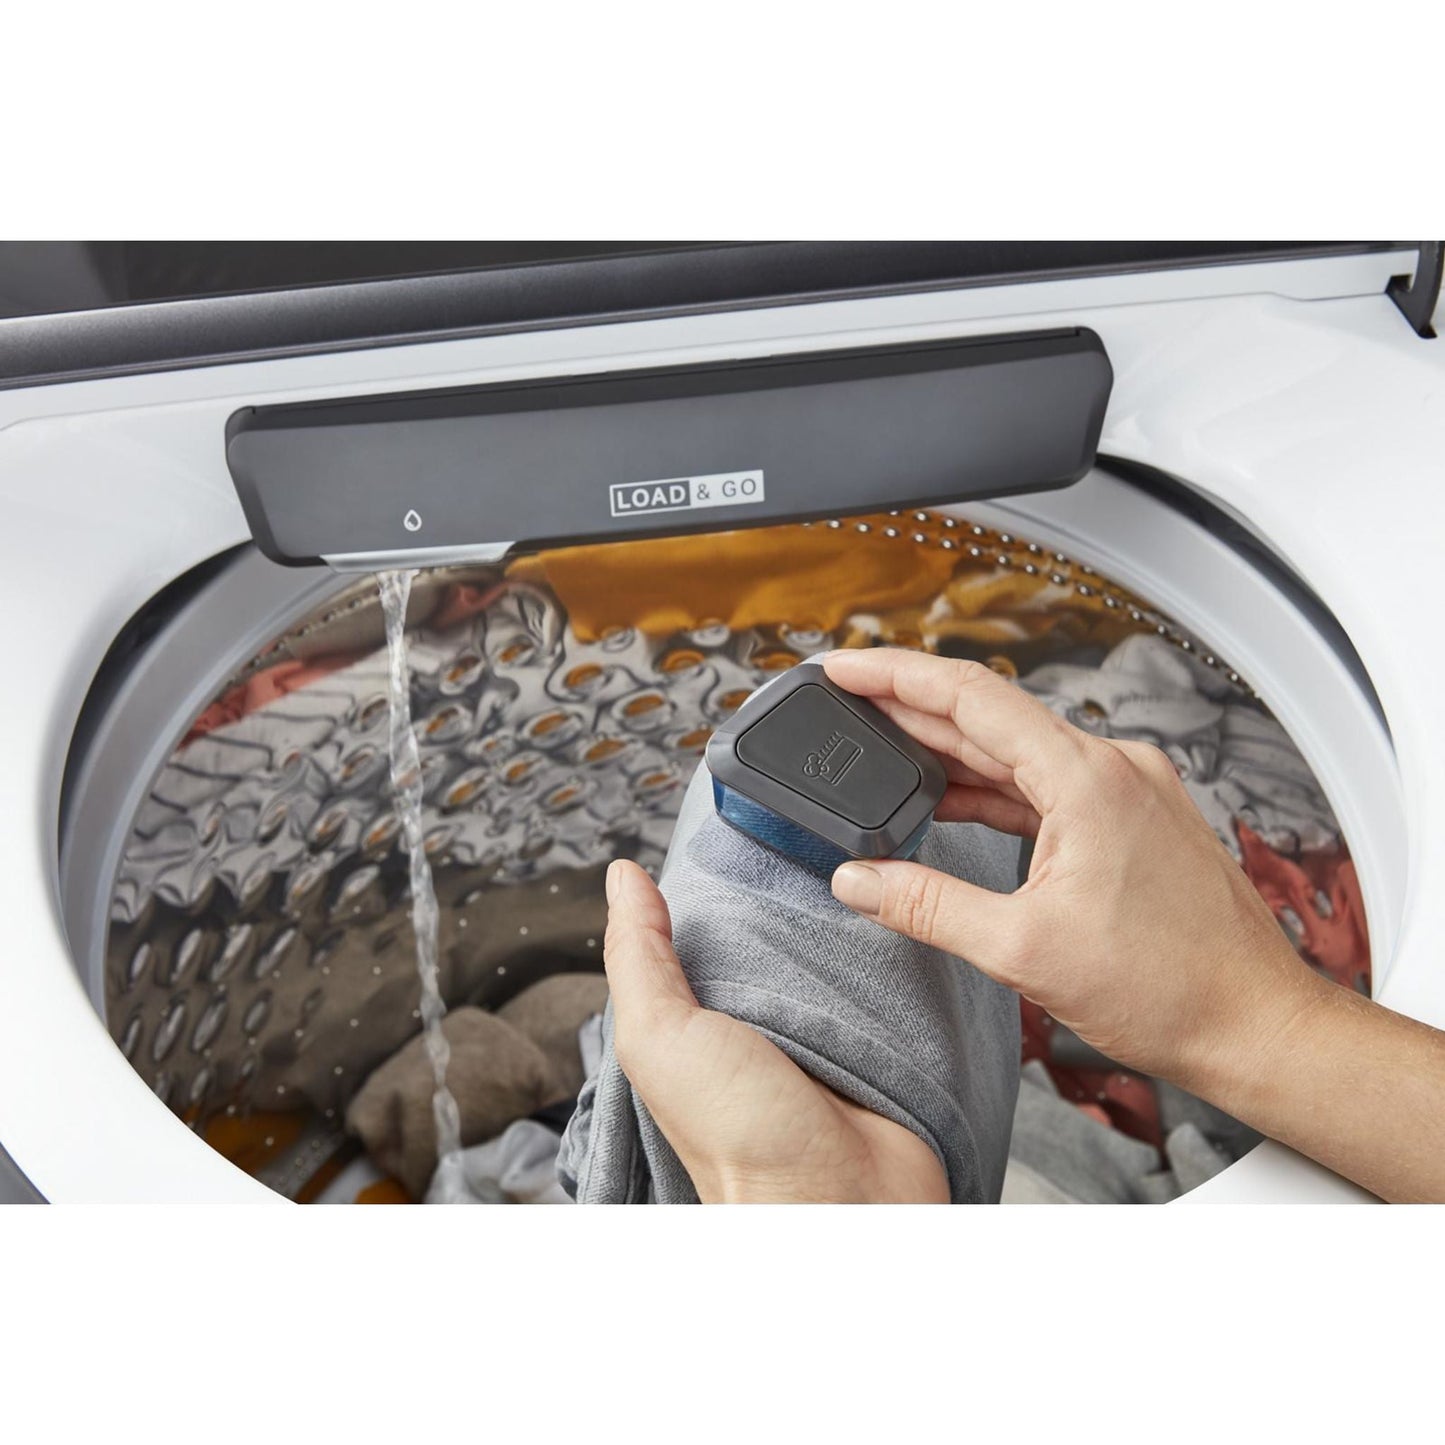 Whirlpool Top Load Washer (WTW6120HW) - White